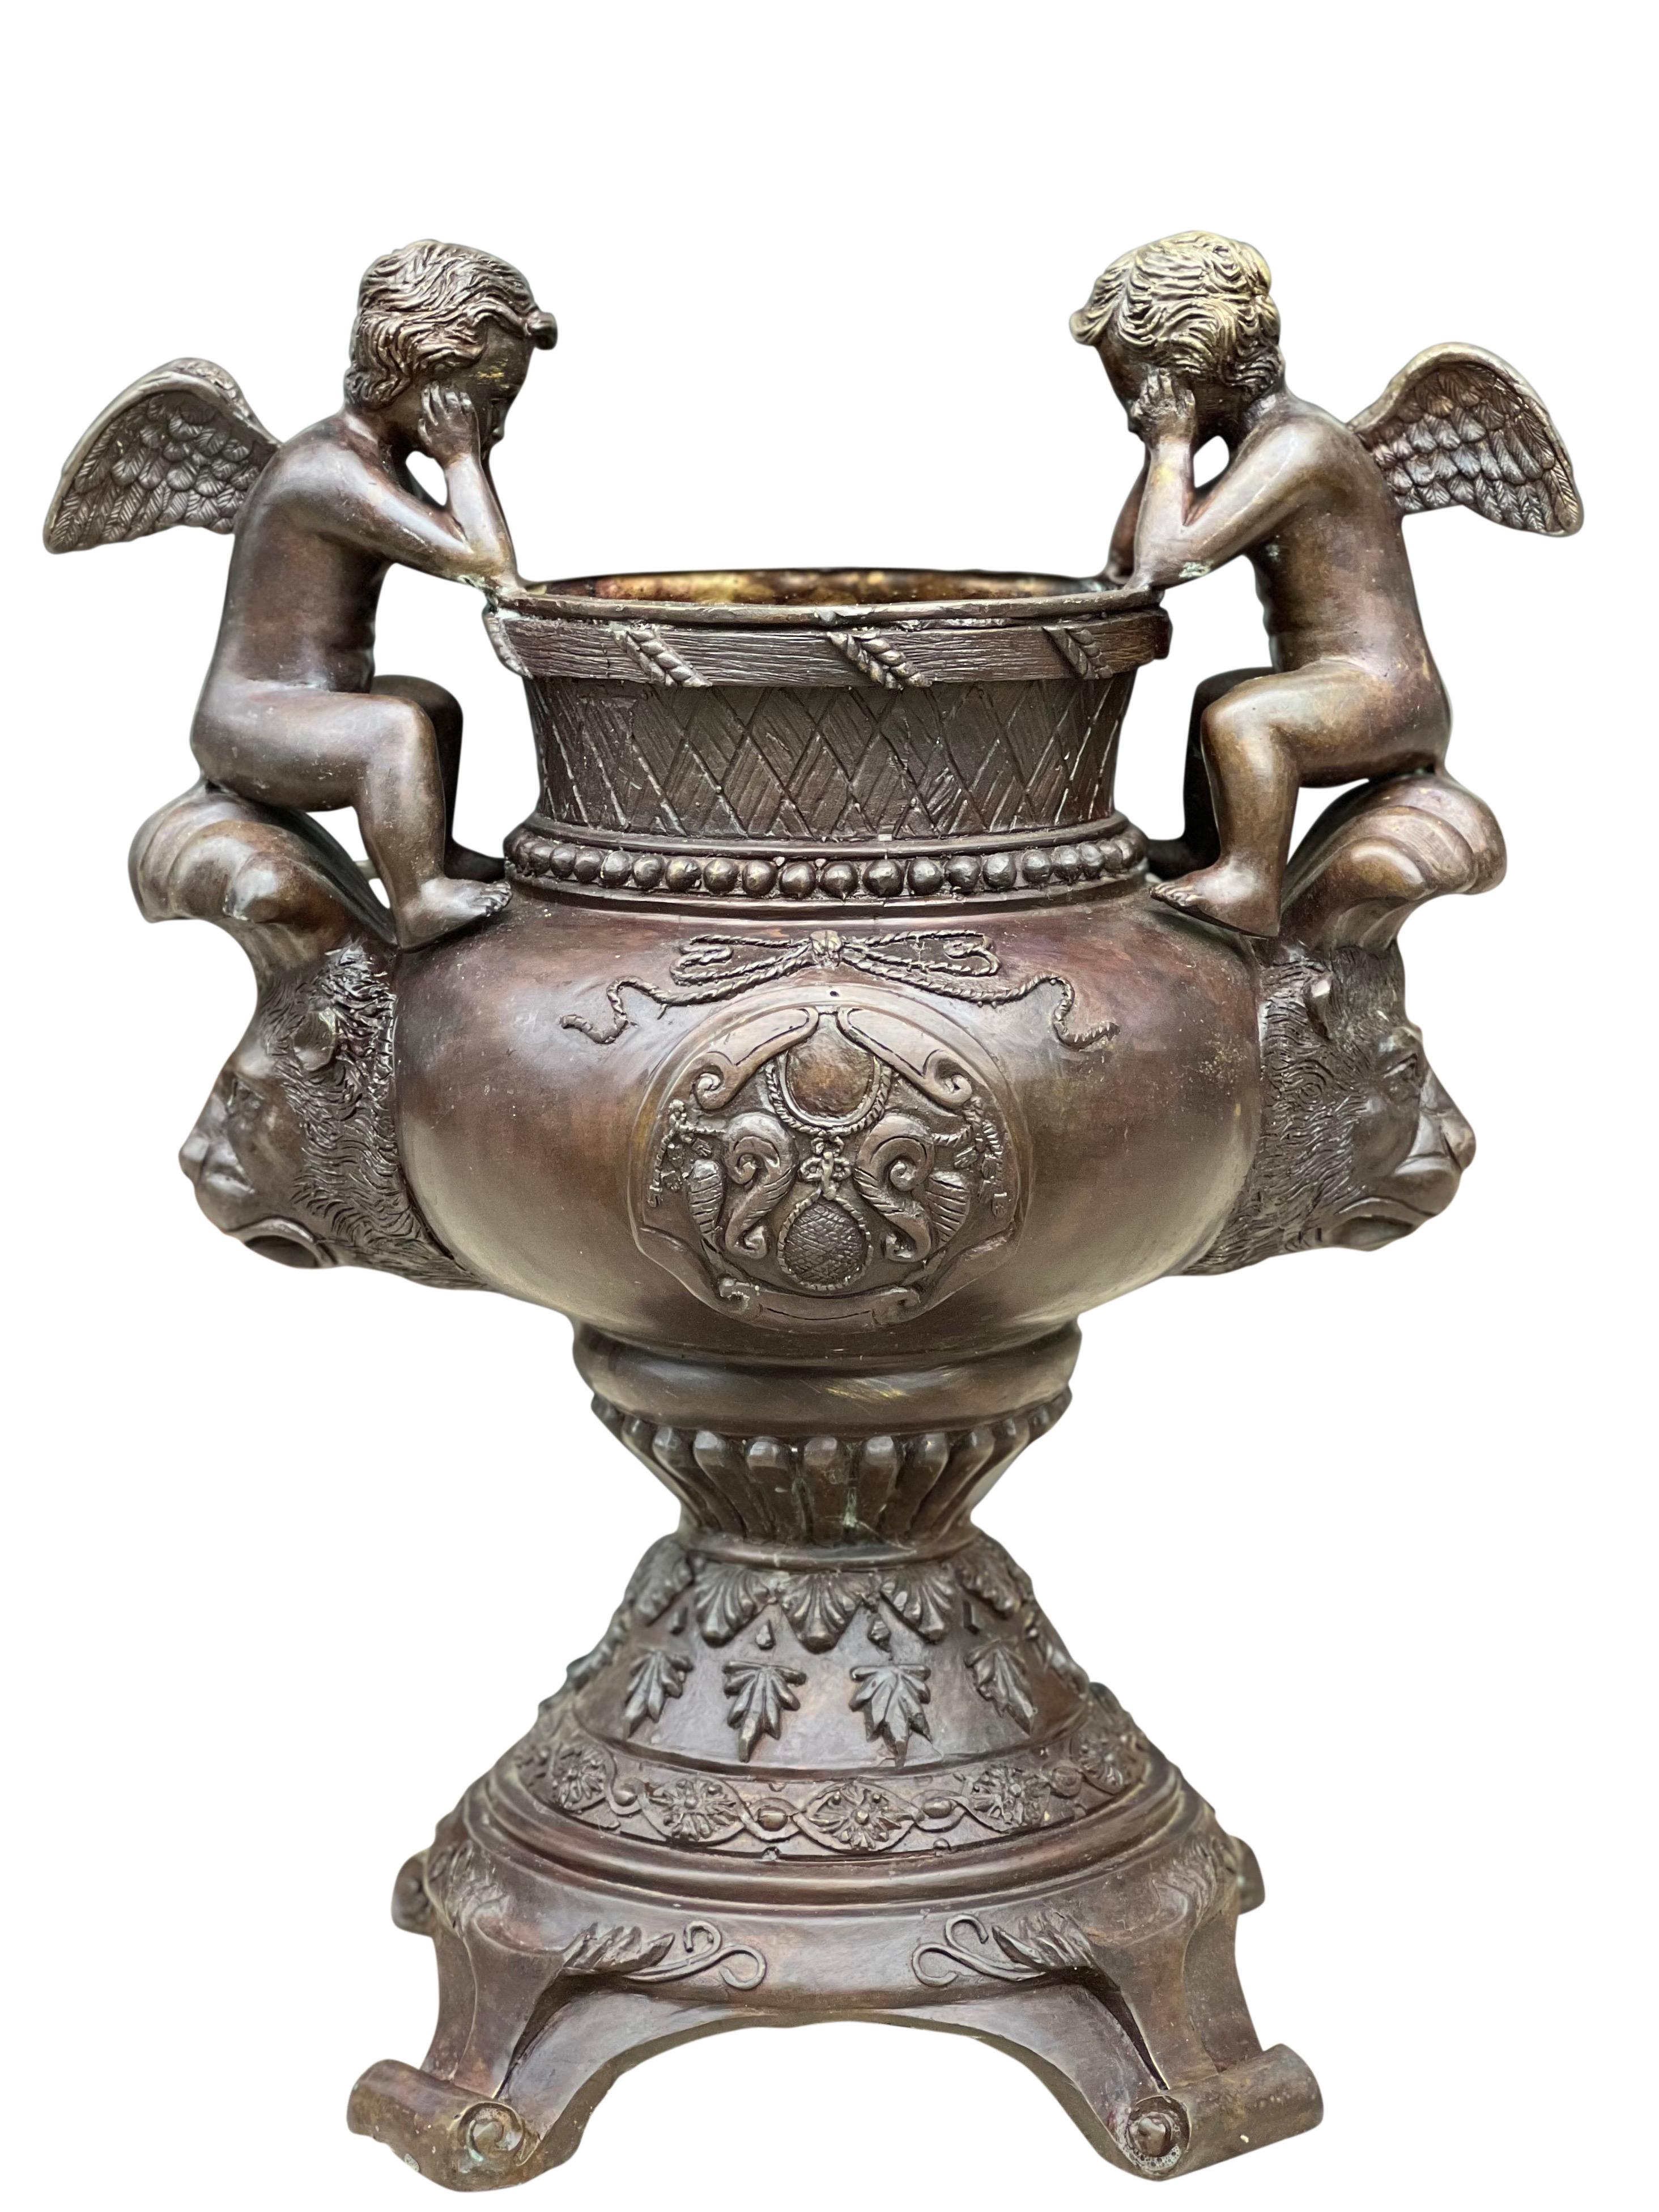 Vintage Maitland Smith bronze urn with cherubs, 1980's.

This beautiful urn is flanked by seated cherubs and features lion masqueron handles. Unique footed base. Center medallion is garnished with garland and the urn is ornately detailed with